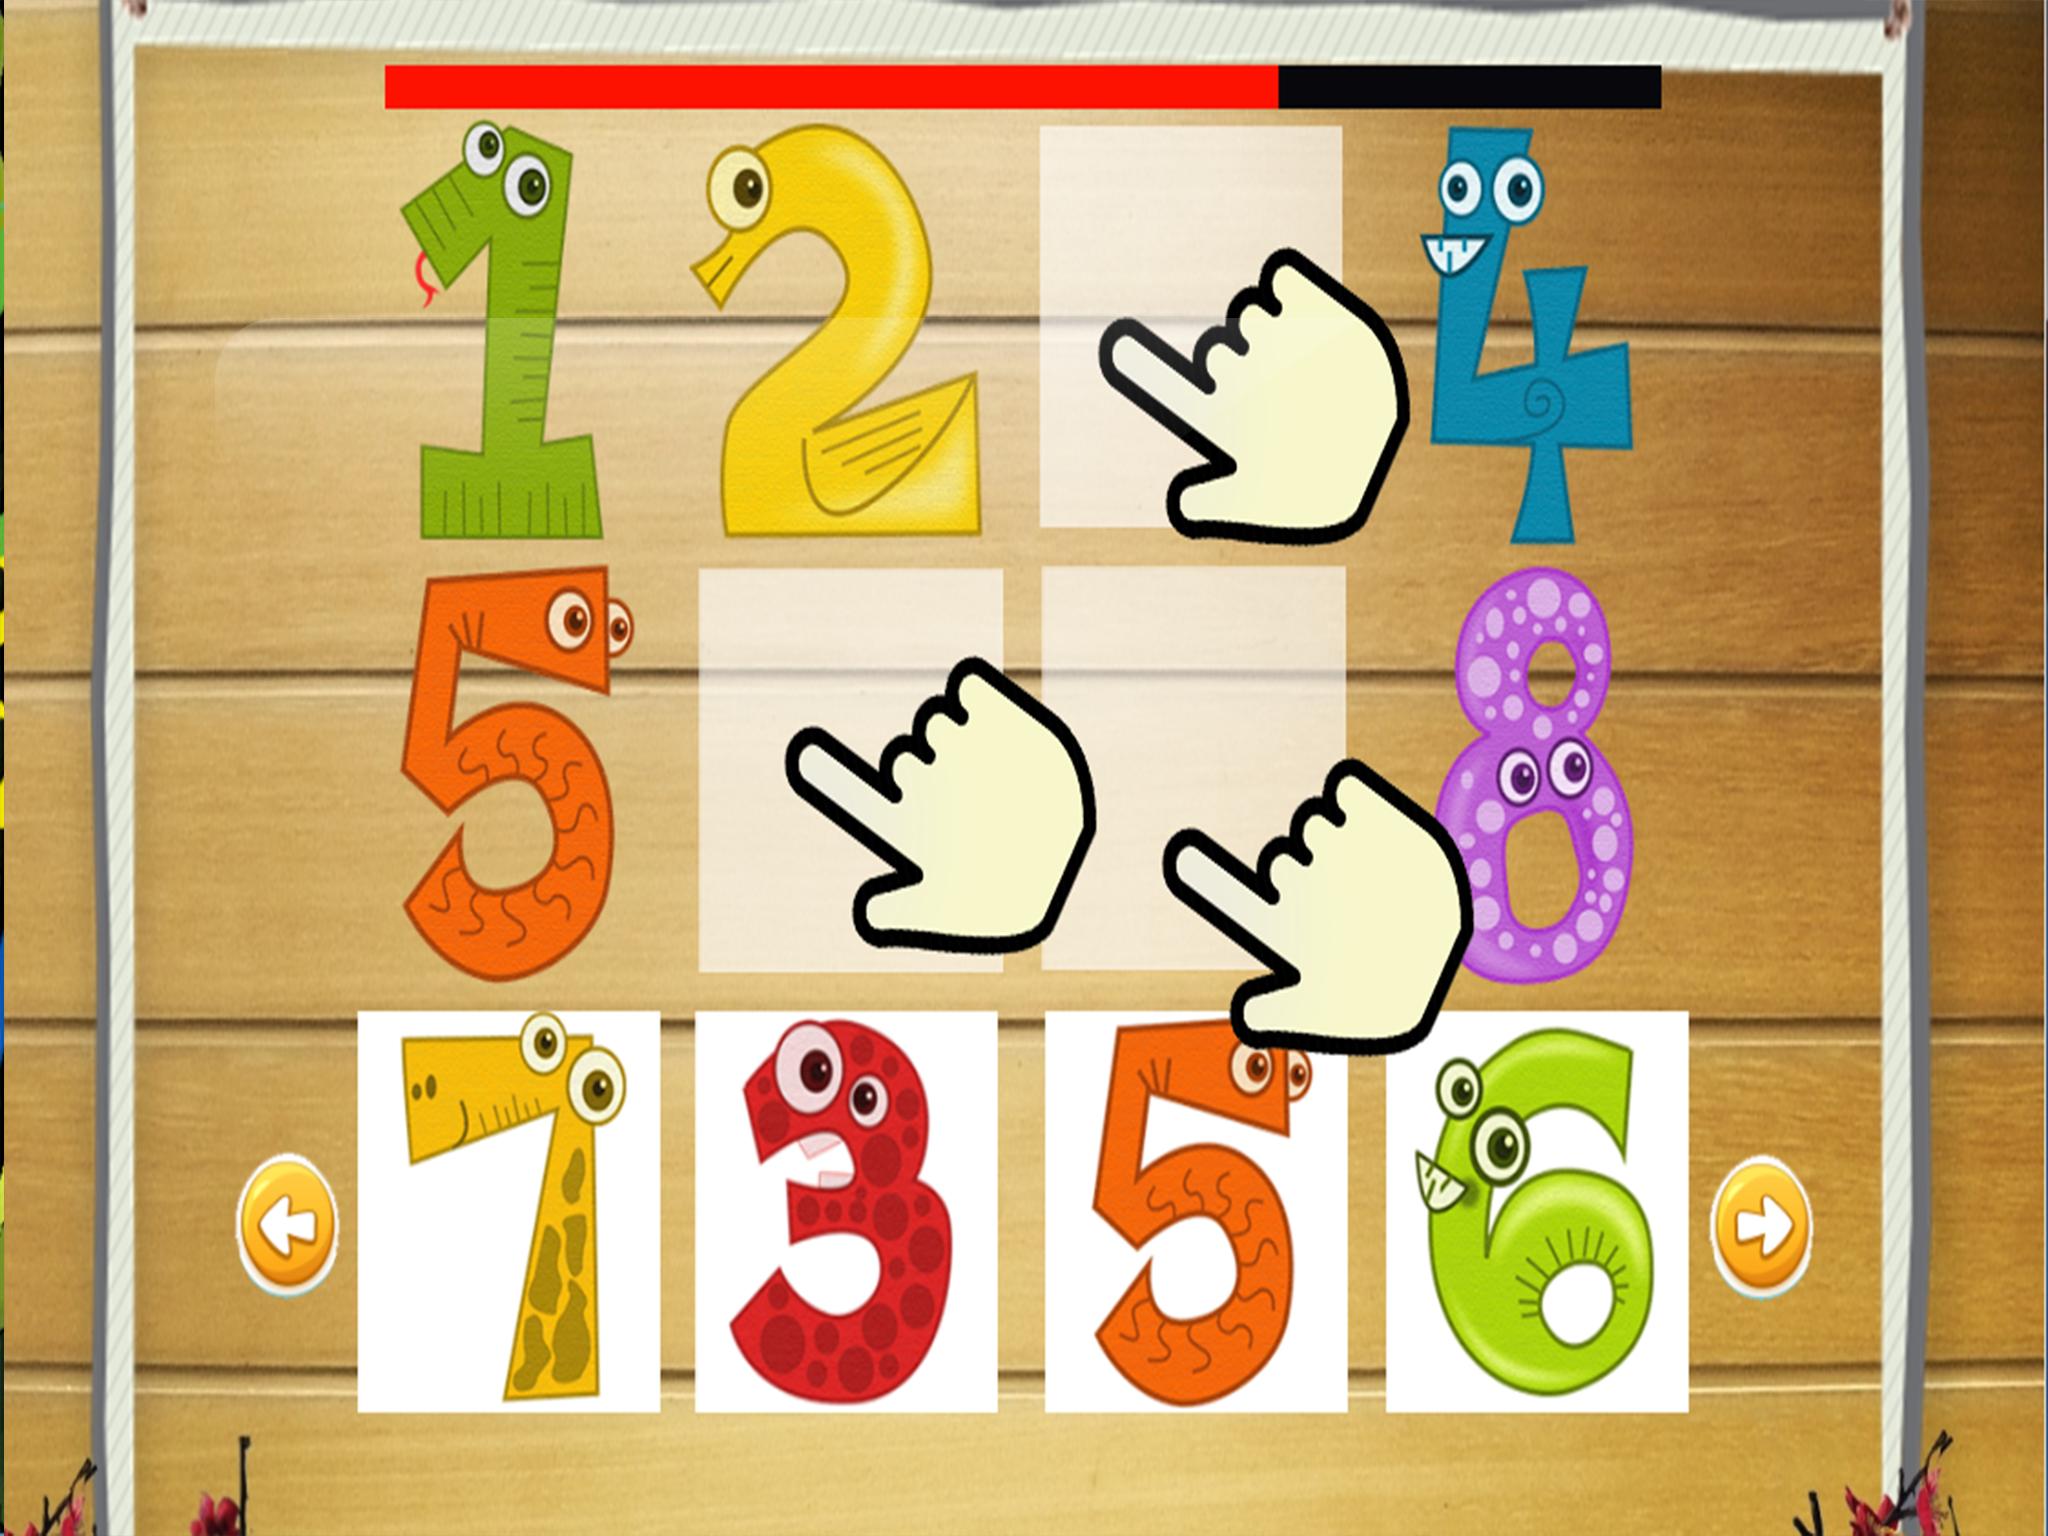 Игра numbers. Numbers games for Kids. Игры с числами. Numbers game for Kids 1-10.